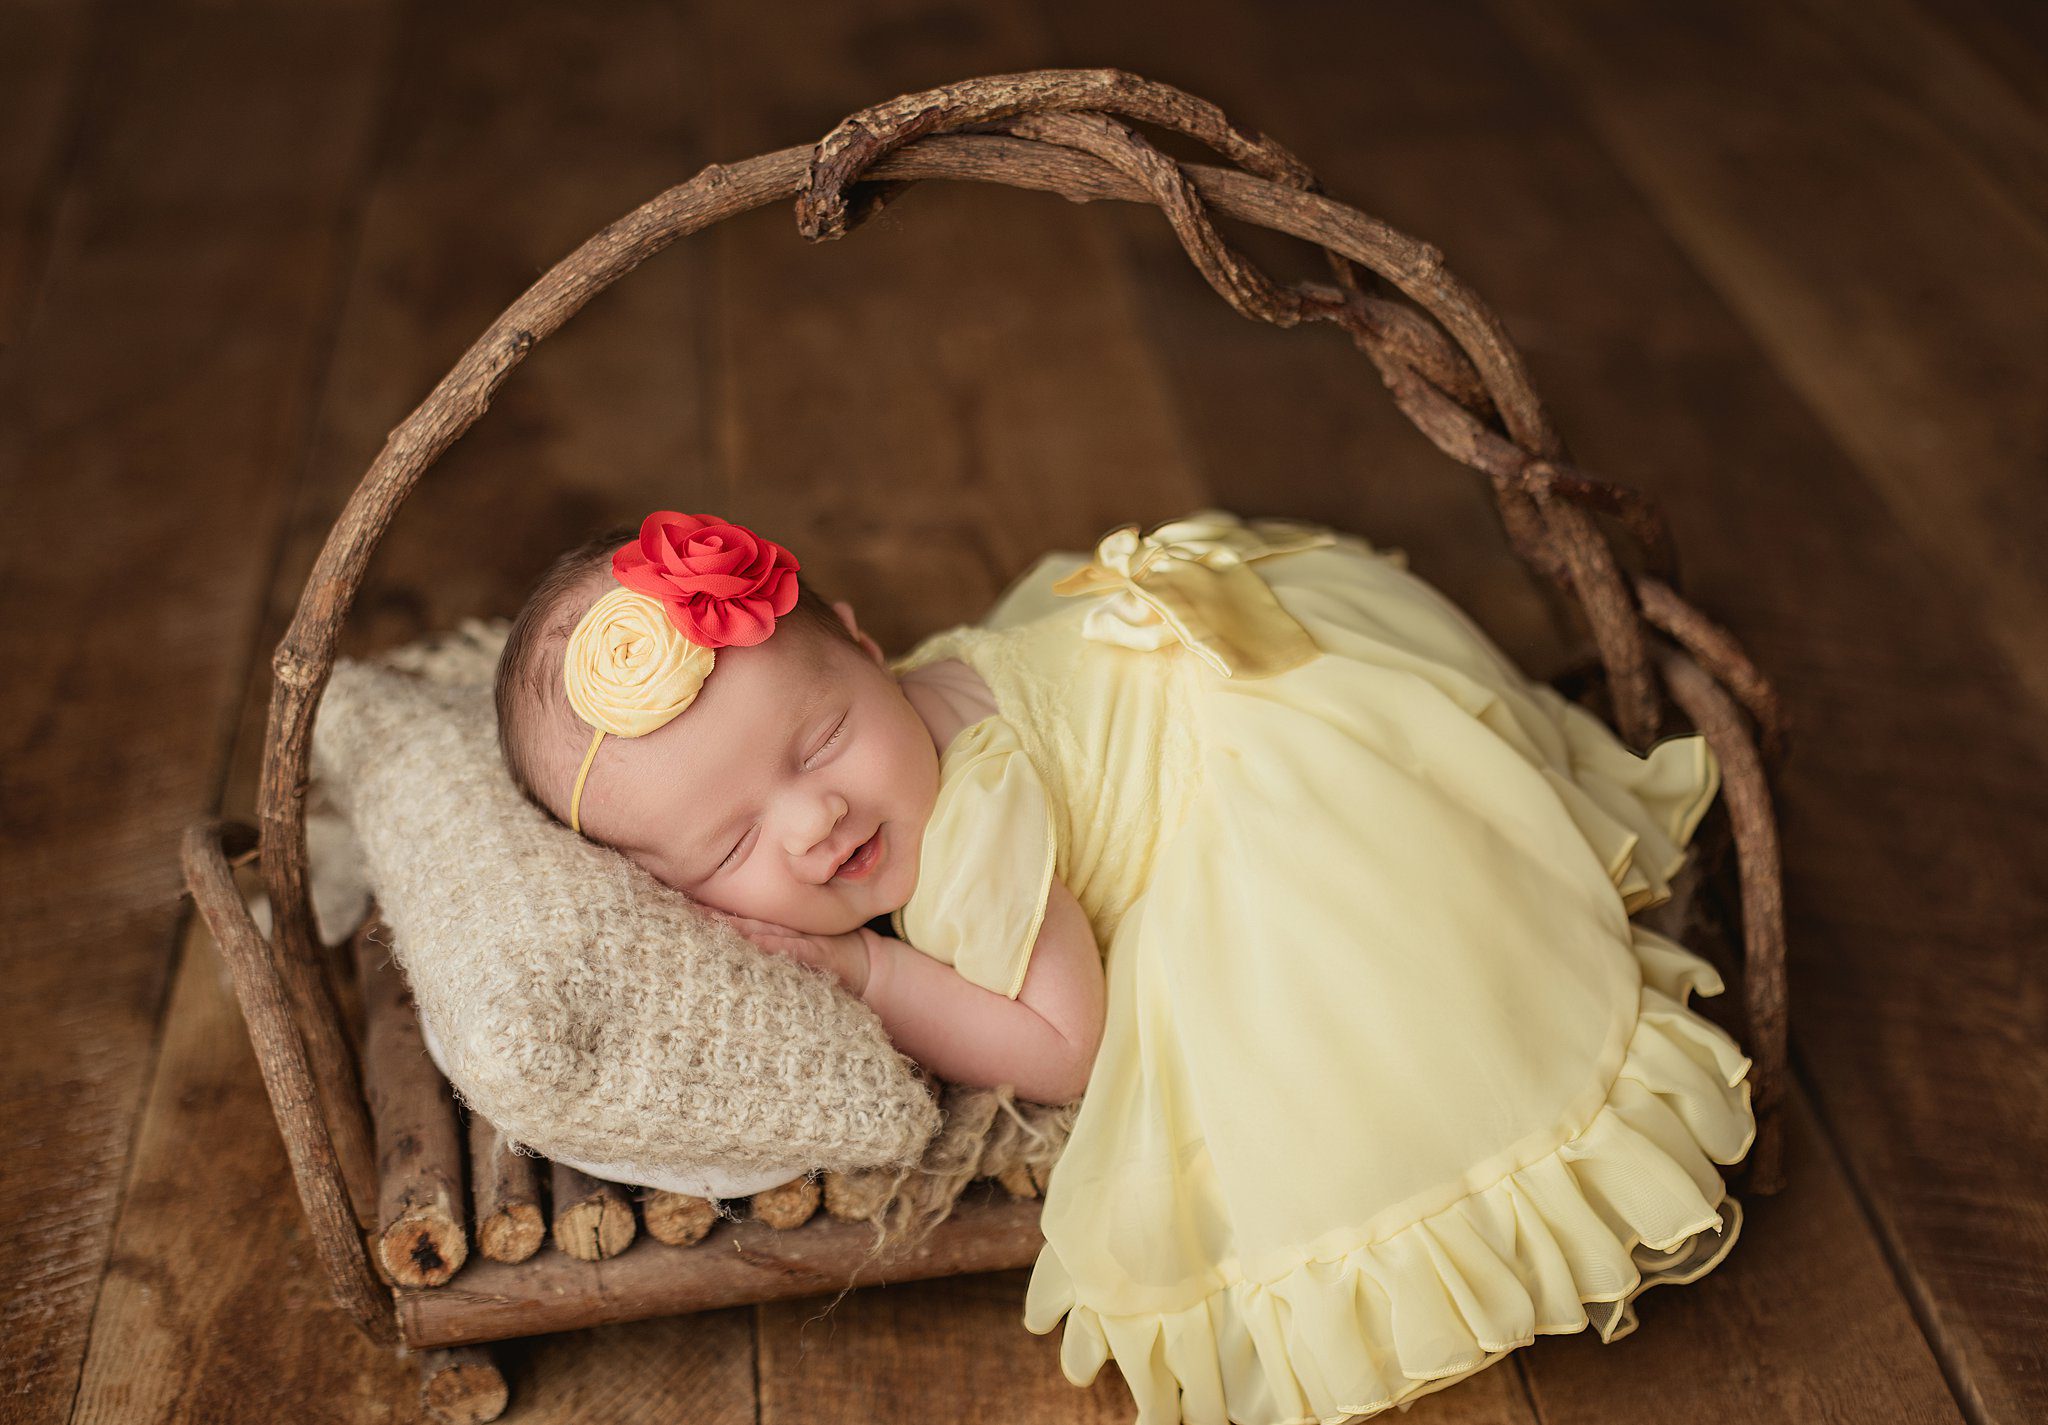 A newborn baby girl sleeps on a rustic wooden bed in a yellow dress and floral headband thanks to orange county birth center